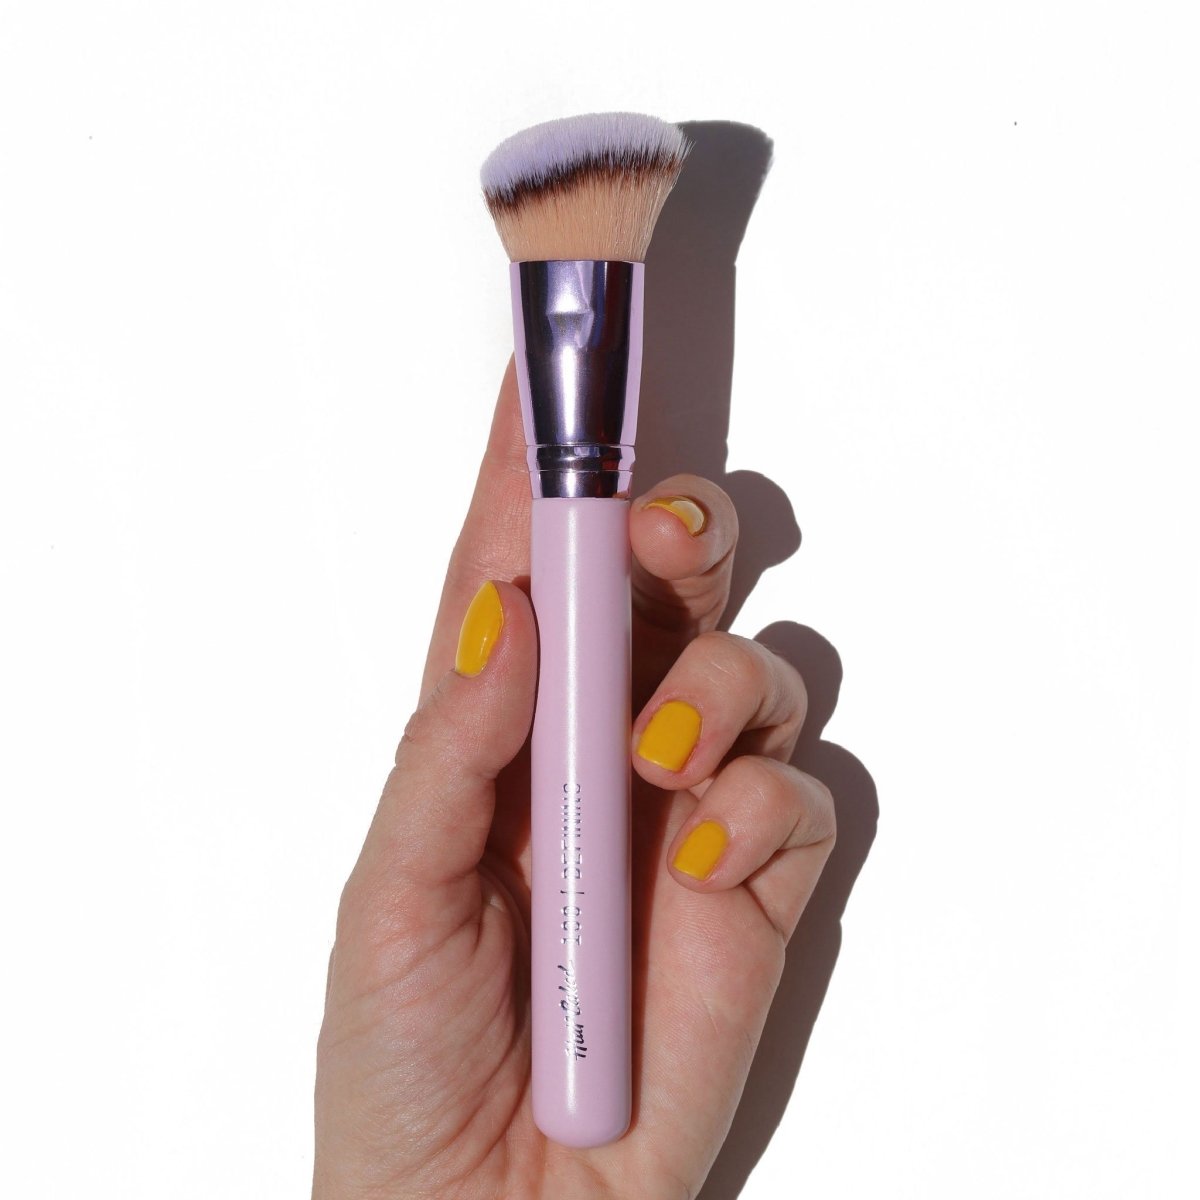 shiny purple angled contour brush in hand with yellow fingernails - defining - half caked makeup